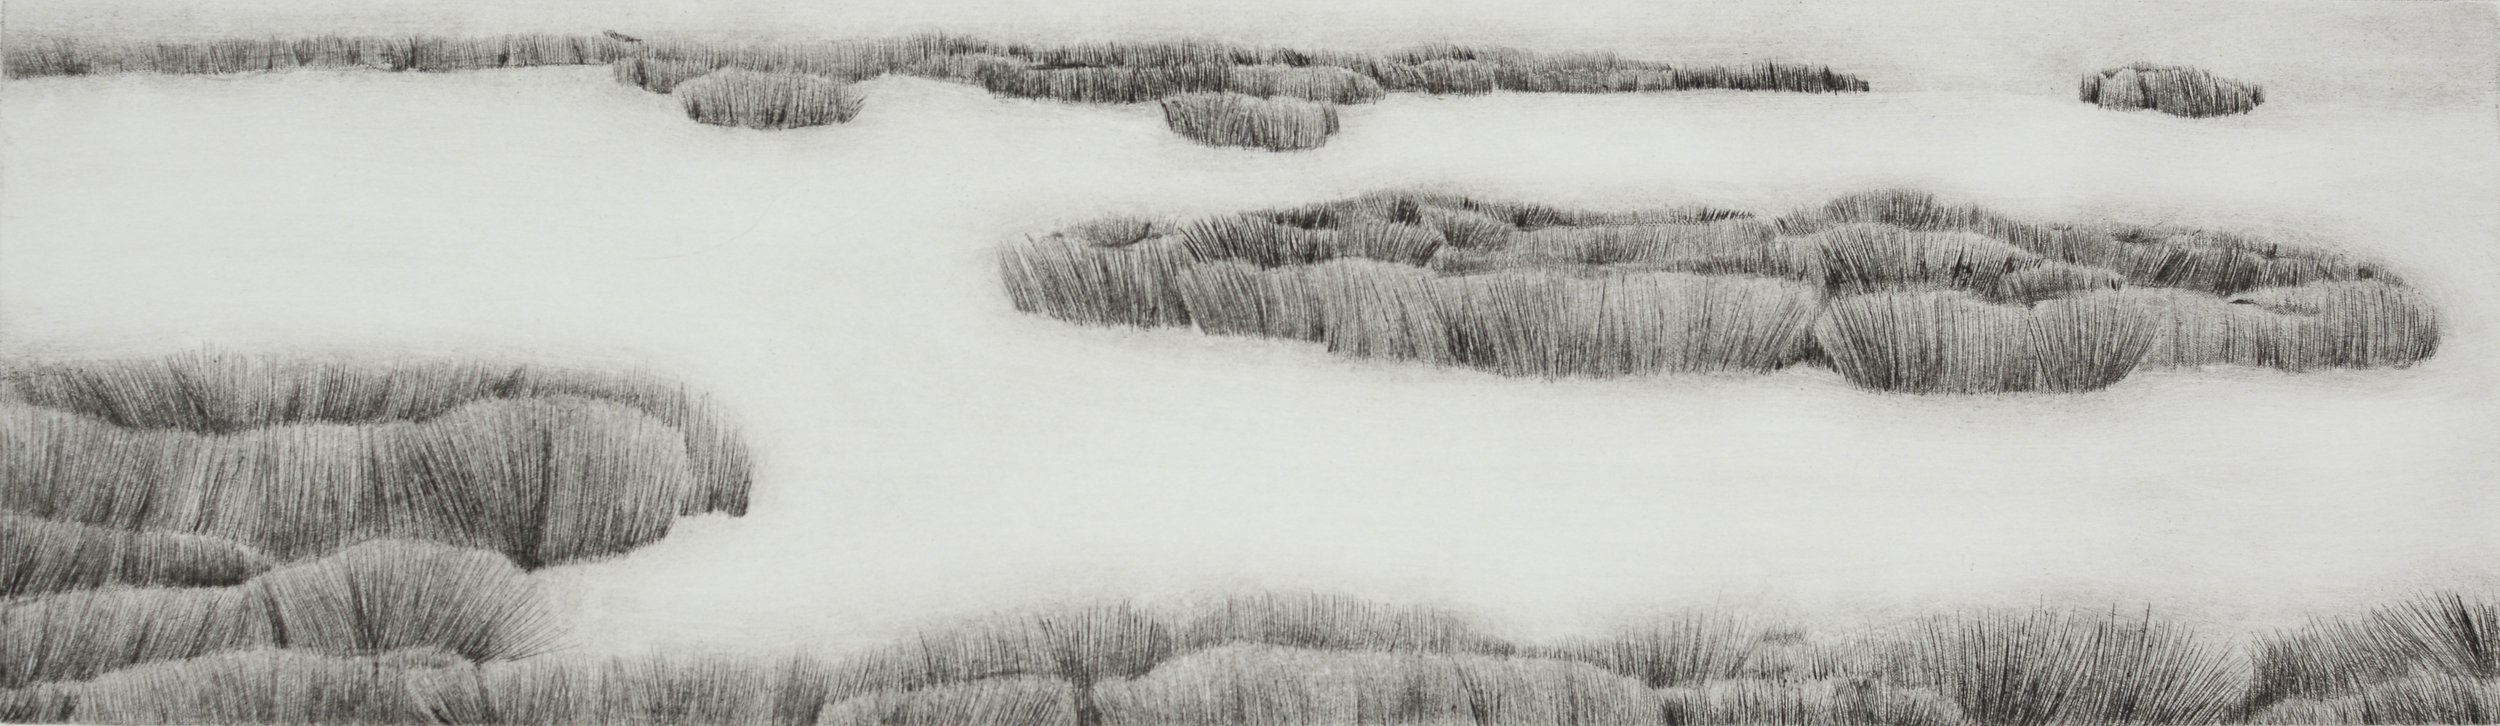  ‘Once Lay a Wetland - Kōreti II’  Drypoint. Ink on Hahnemuhle 300gsm Paper. Image: 151 x 520mm. Paper: 295 x 640mm  Held in the collection of The Southland Museum and Art Gallery, NZ  Kyla Cresswell, 2023 